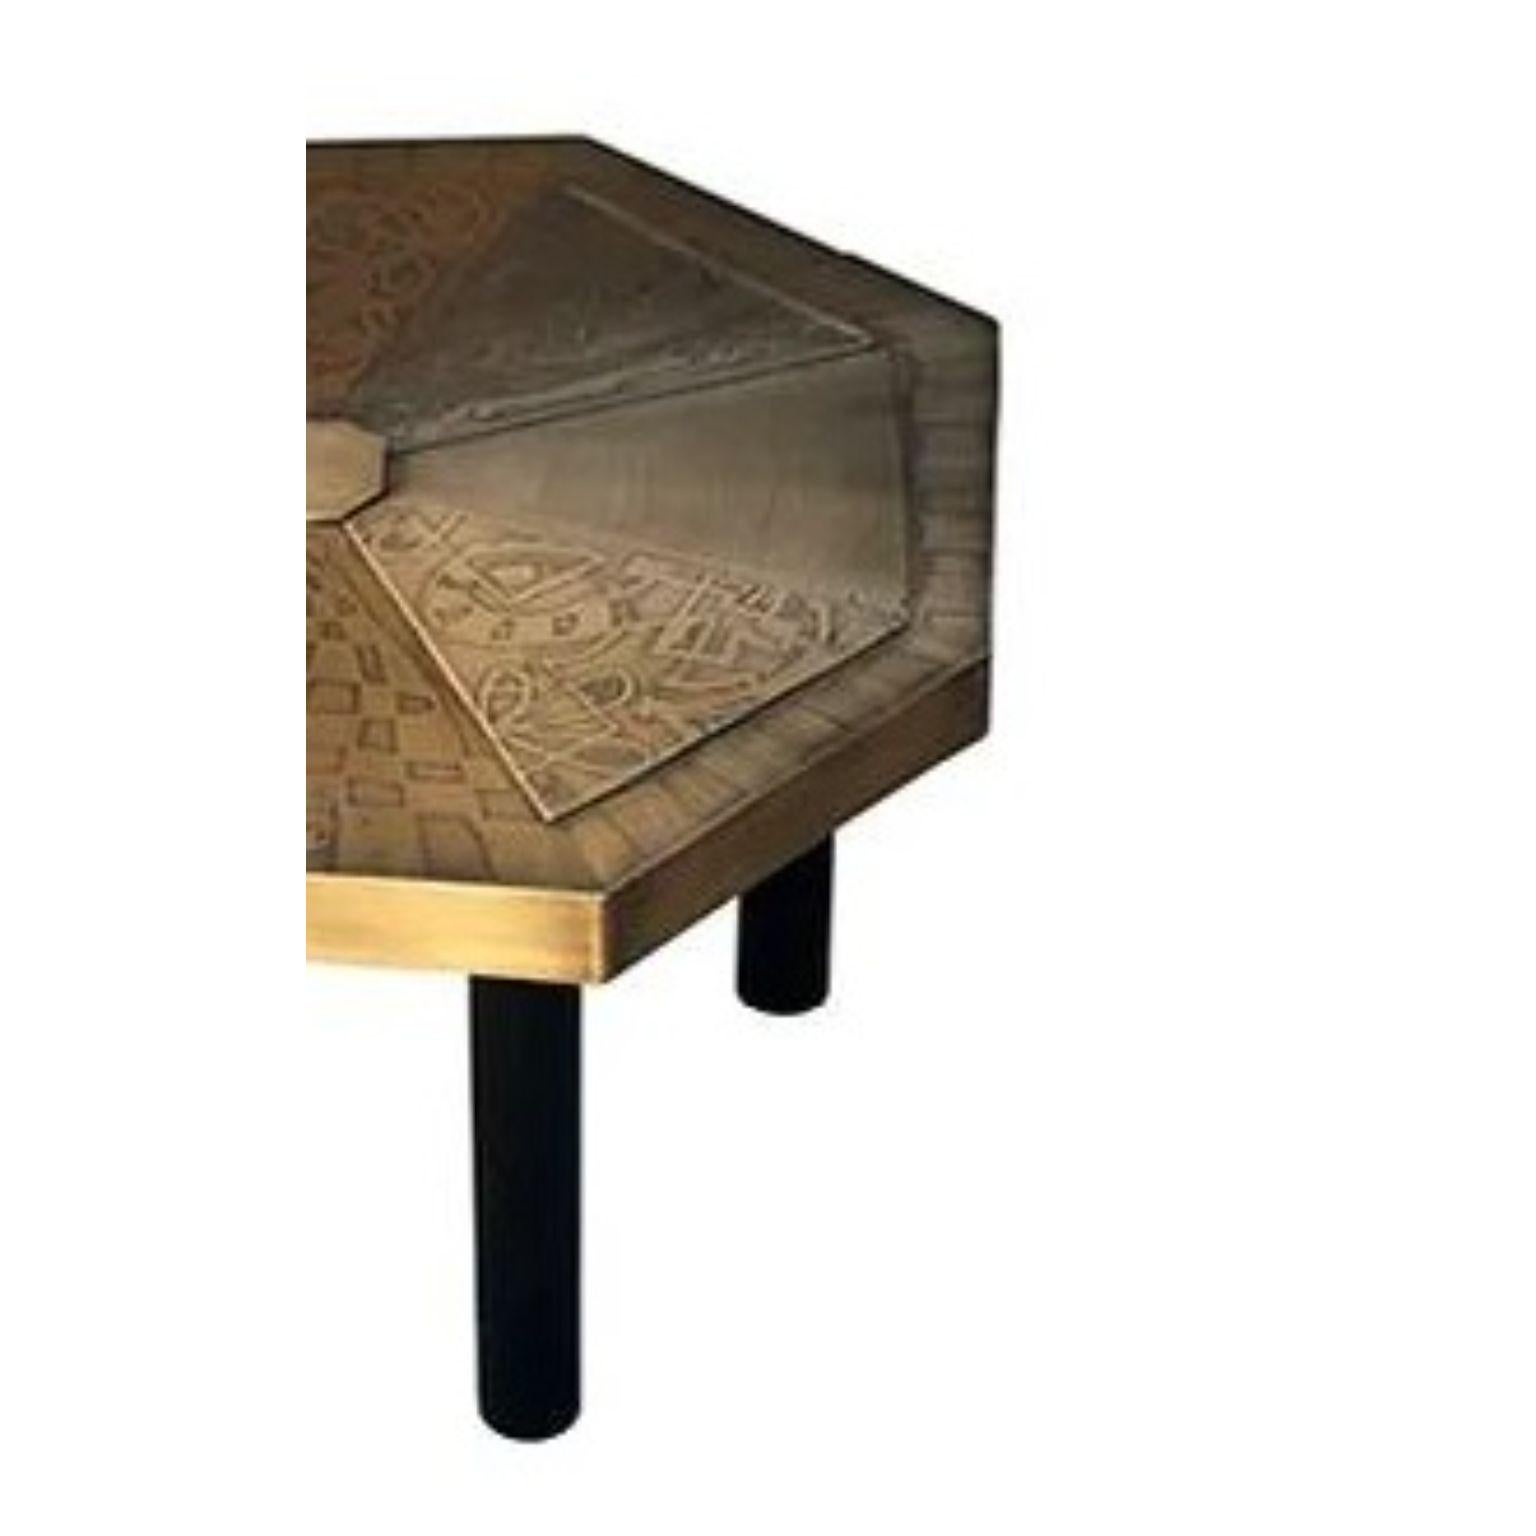 Windmill Brass Coffee Table by Brutalist Be
One Of A Kind
Dimensions: D 61 x W 61 x H 36 cm.
Materials: Brass.

Also available in copper and in matte, glossy or black-patinated finishes. Please contact us. 

Brass acid etched black patinated coffee